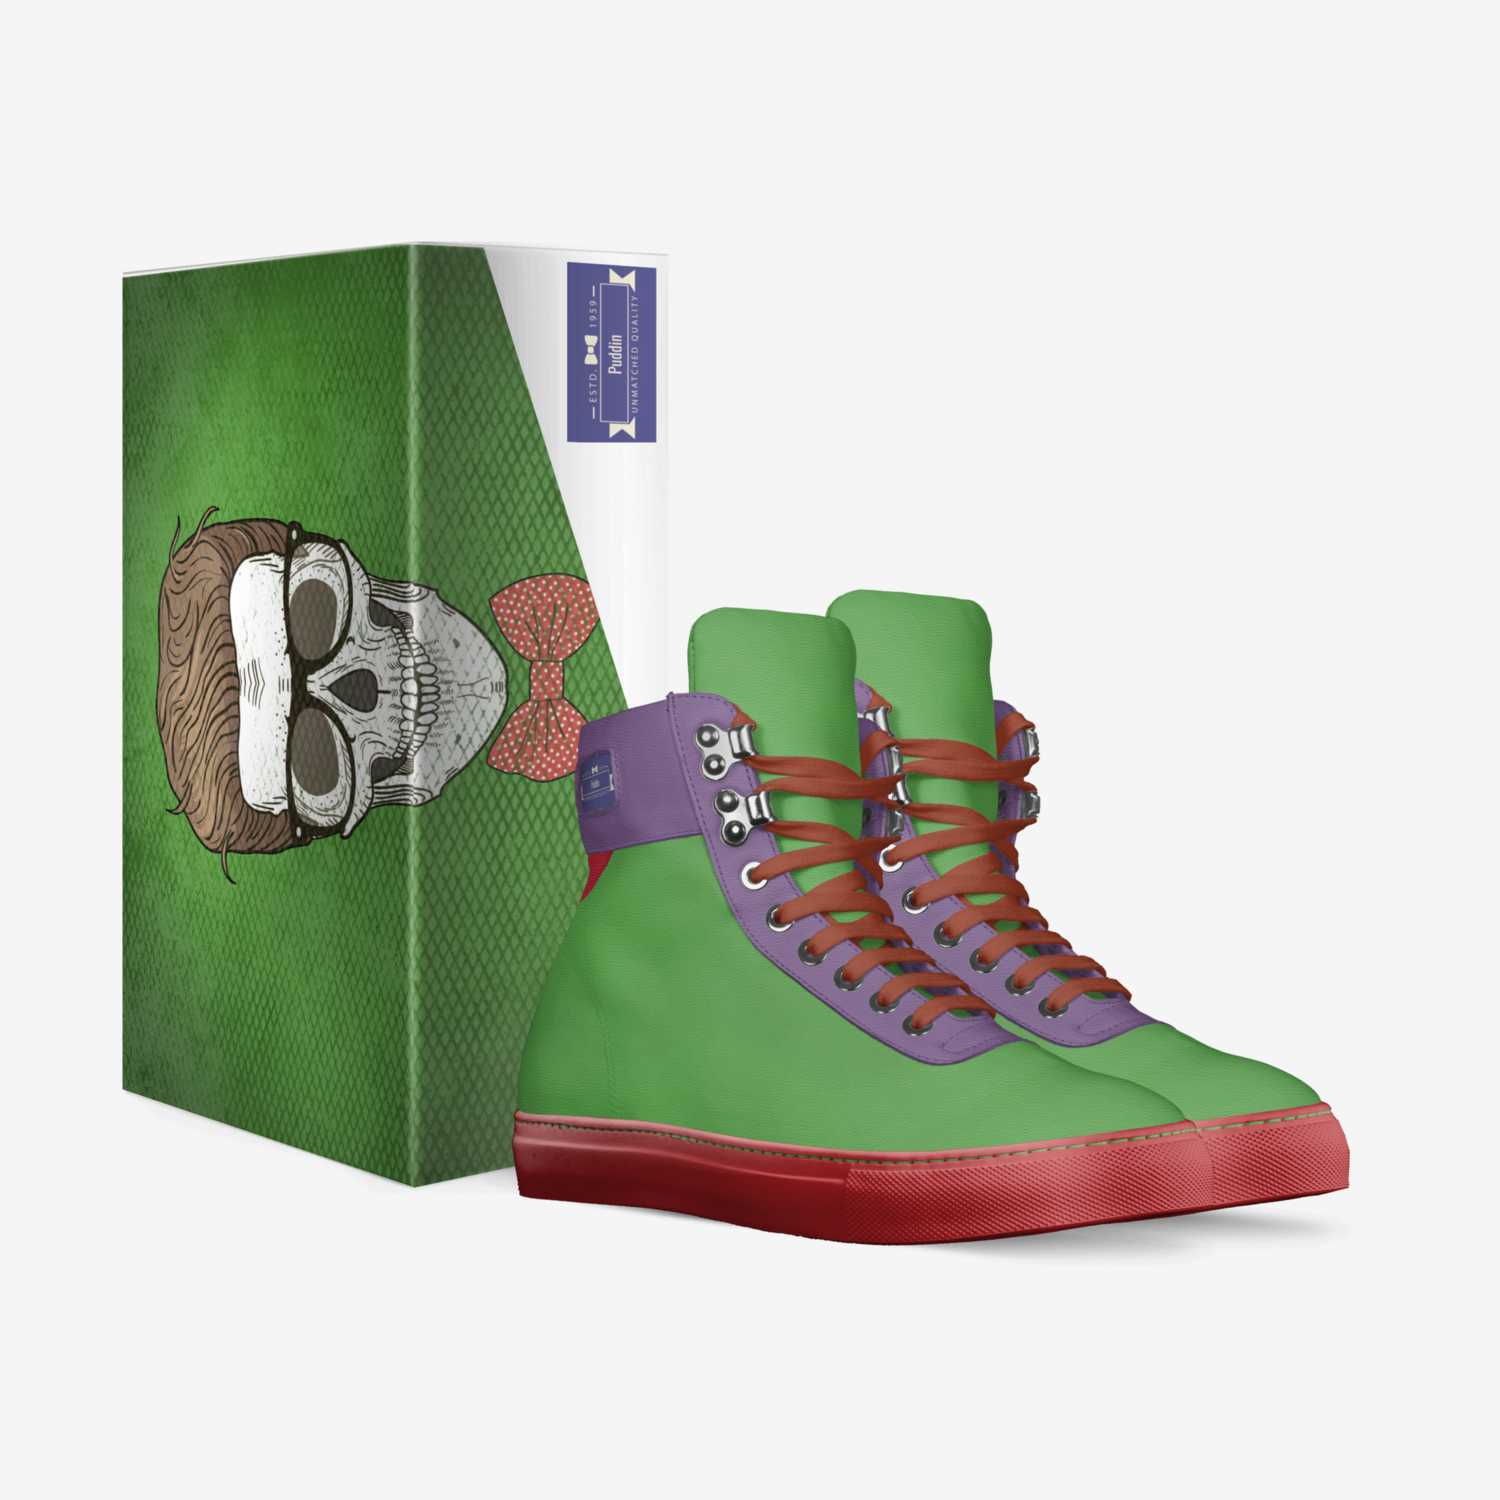 Puddin custom made in Italy shoes by Jonathan Vasquez | Box view